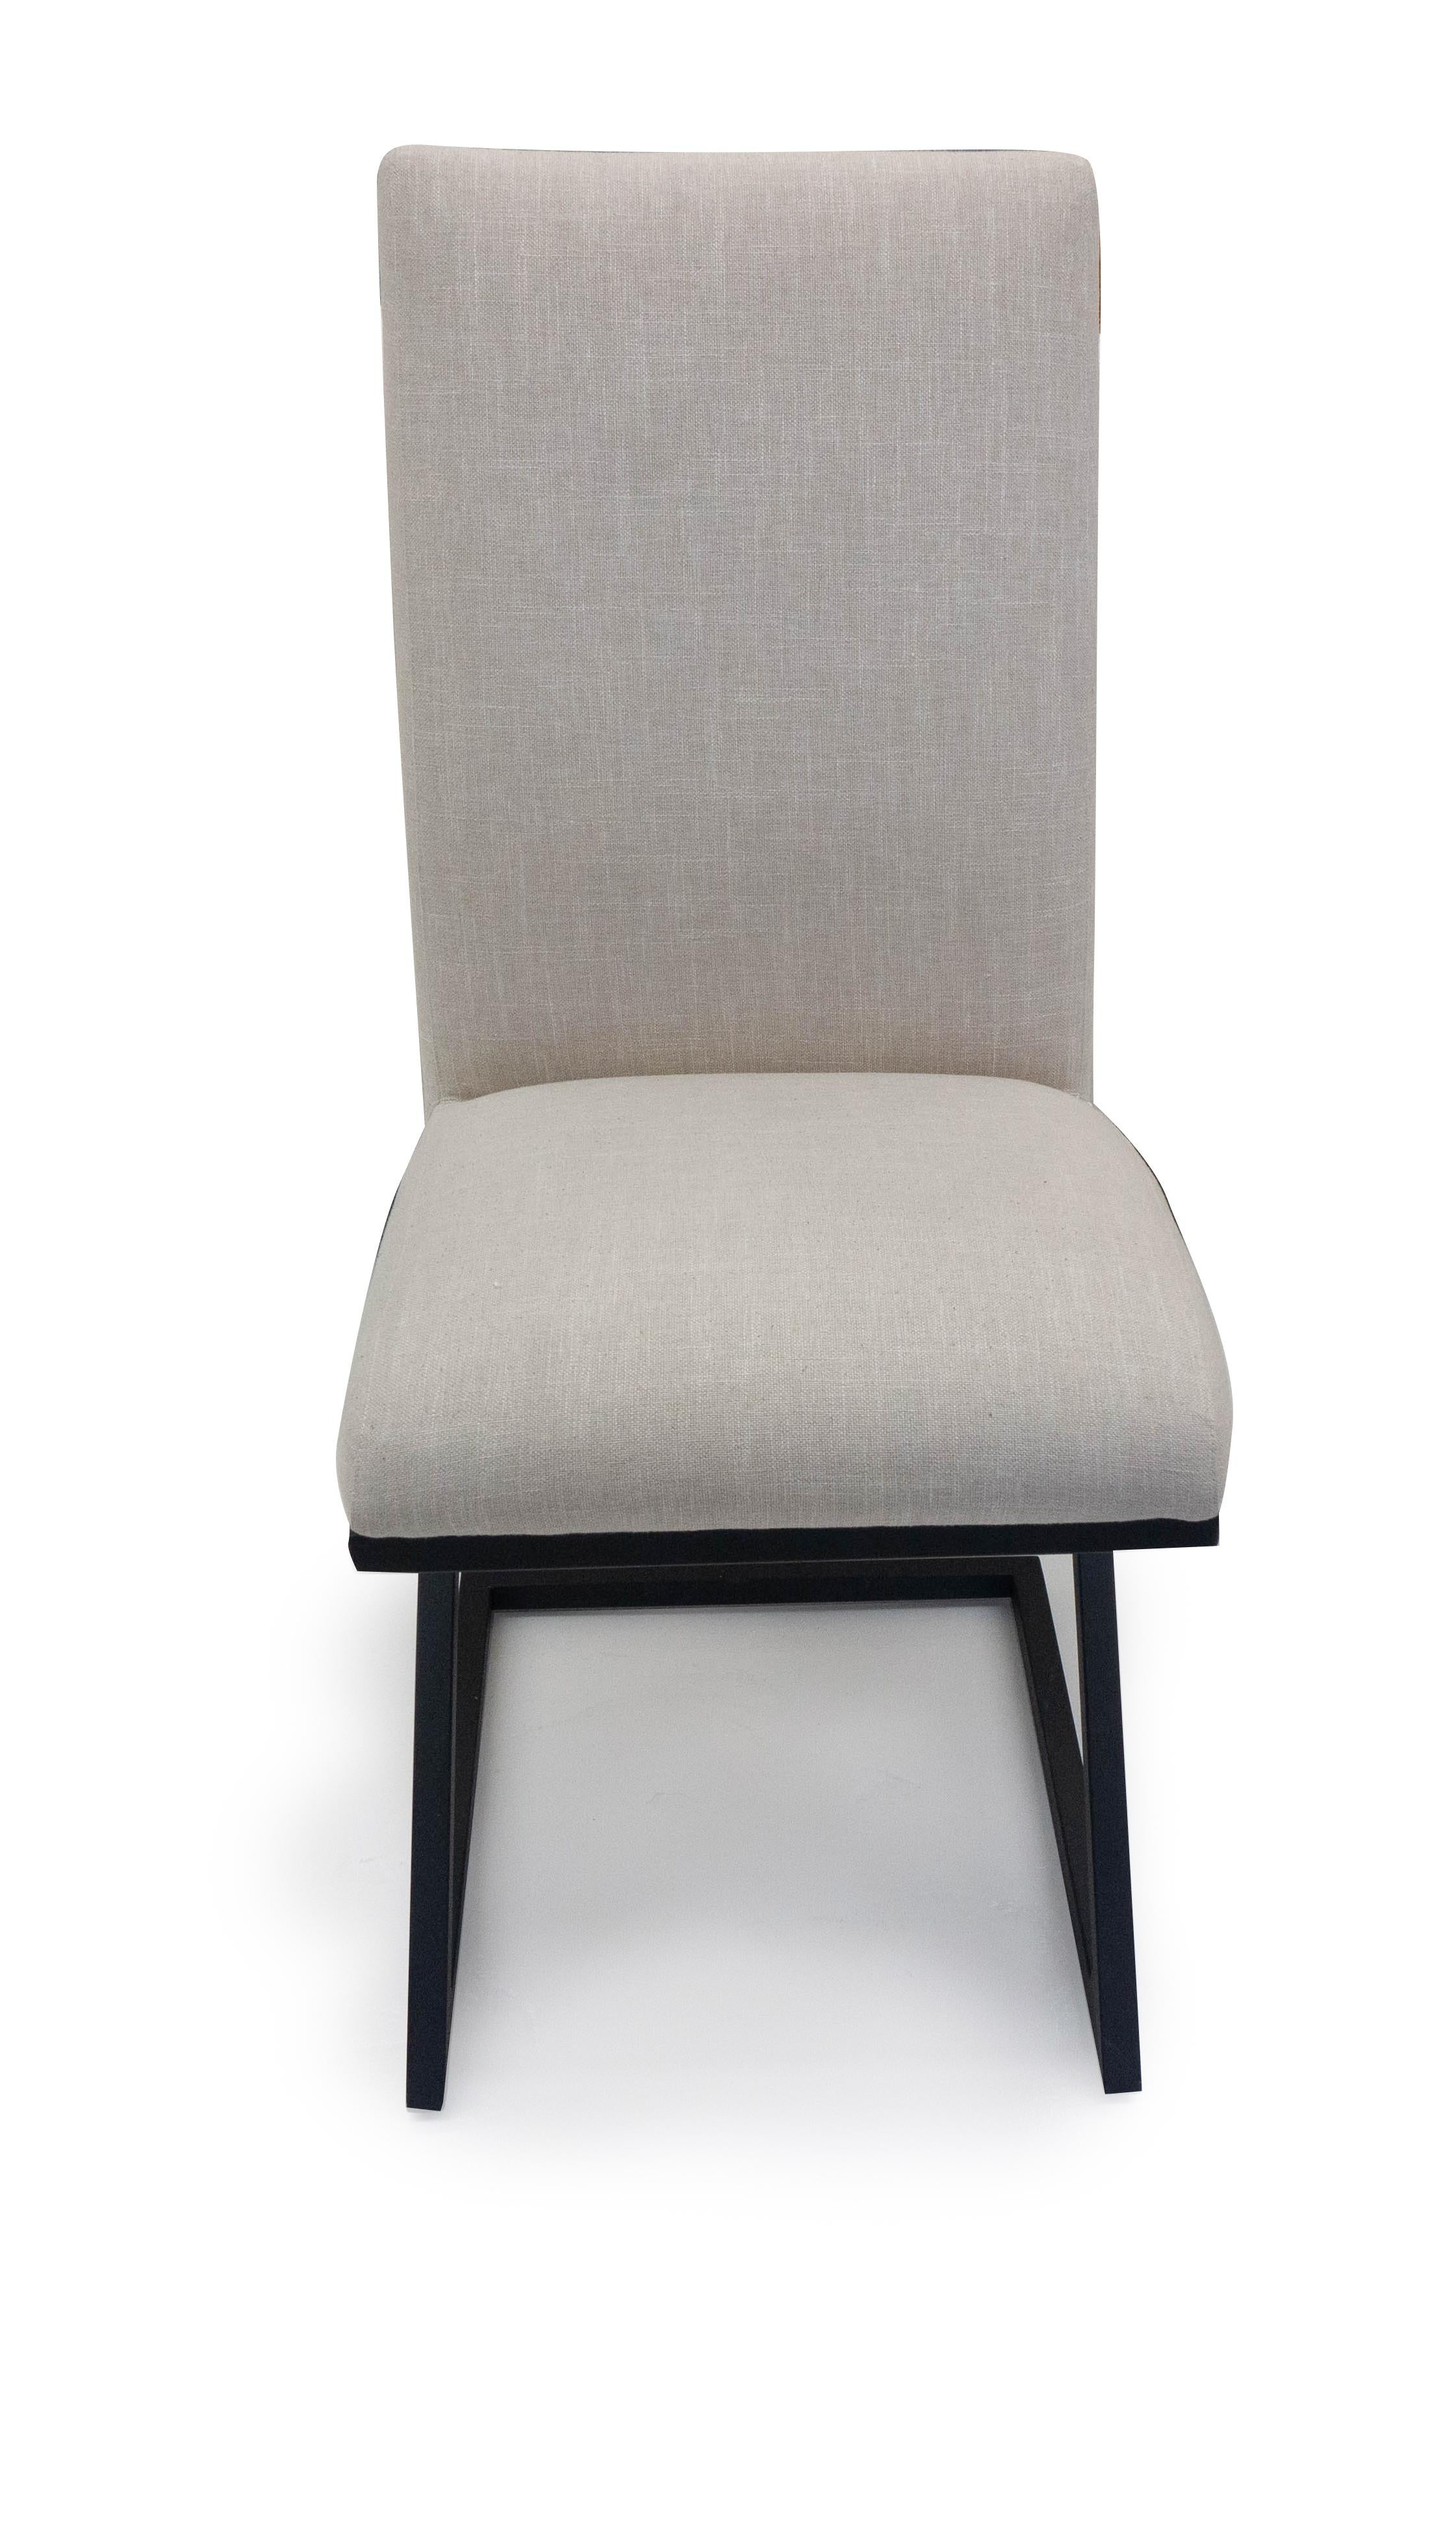 upholstered modern dining chairs